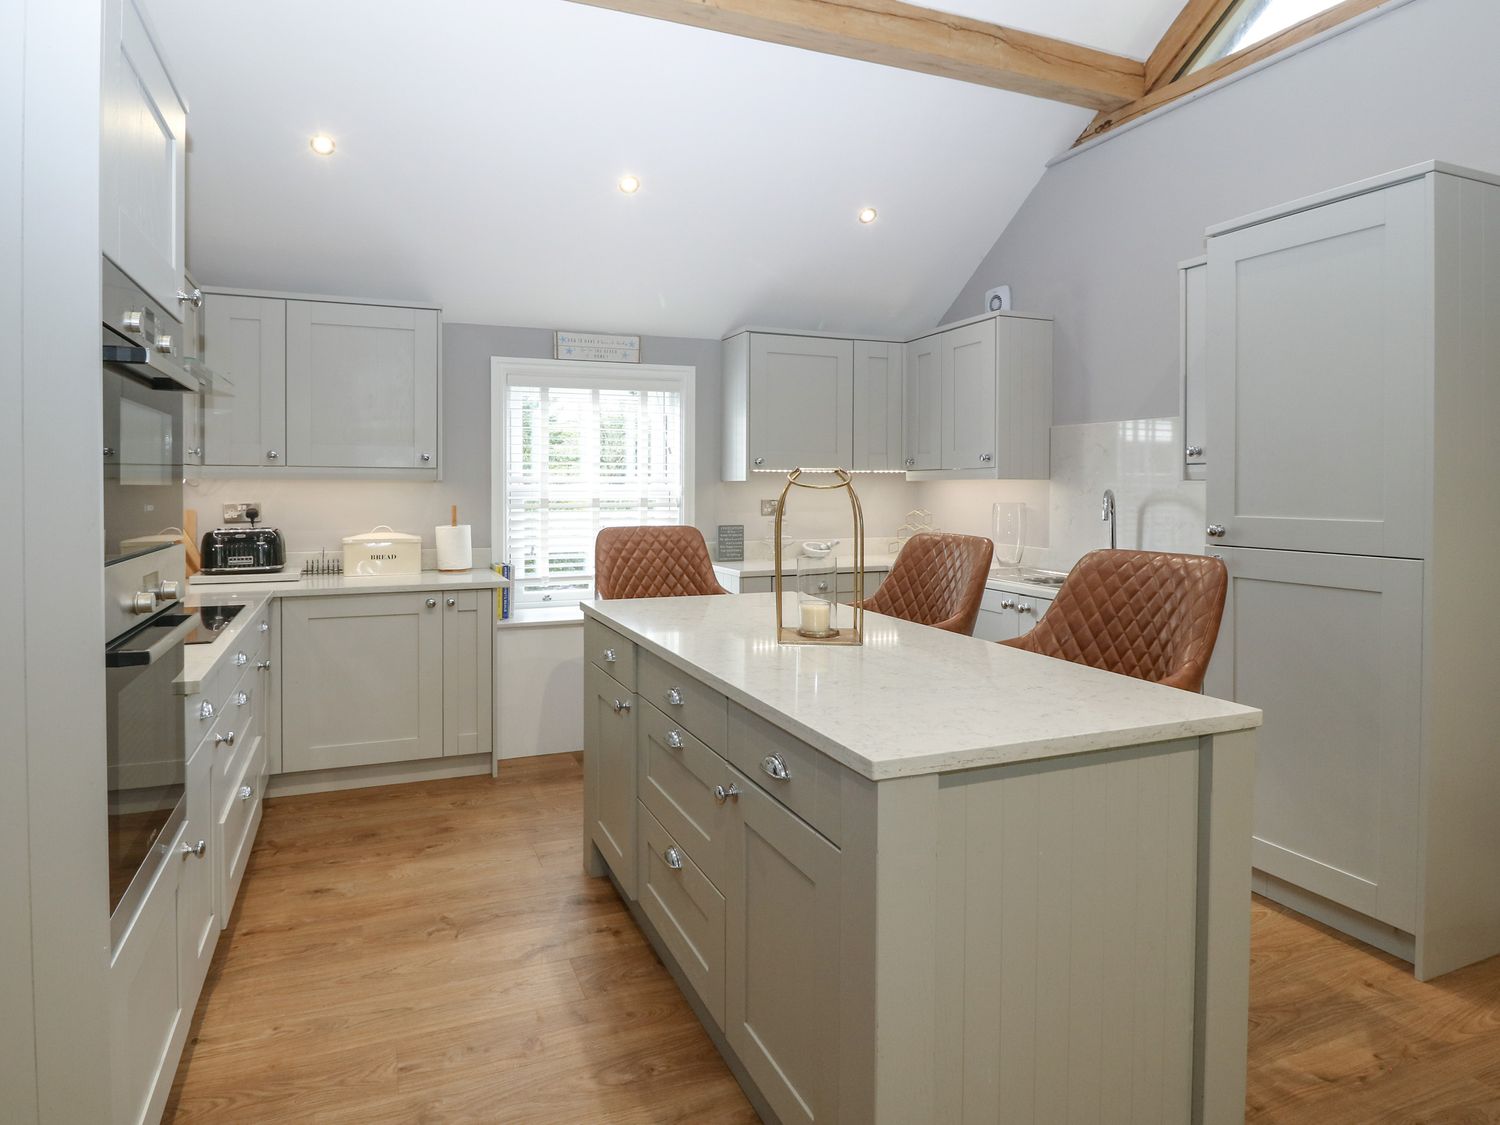 Belle View is near Abersoch in Gwynedd. Four-bedroom home with en-suite bedrooms. Hot tub. Stylish  